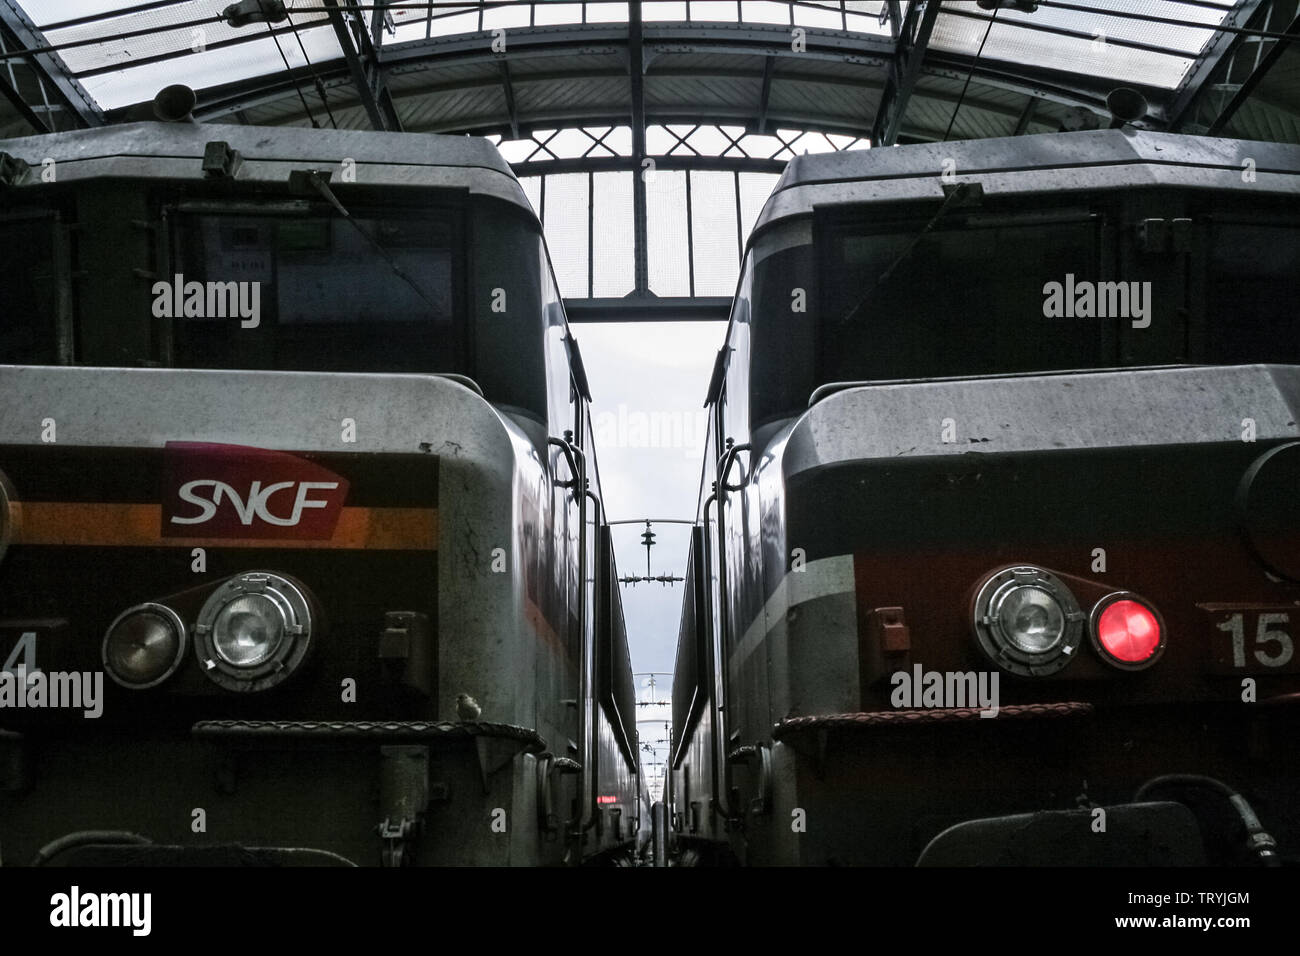 PARIS, FRANCE - AUGUST 19, 2006: Two trains ready for departure in Paris Gare de l'Est train station, with the logo of SNCF seen in front. This train Stock Photo